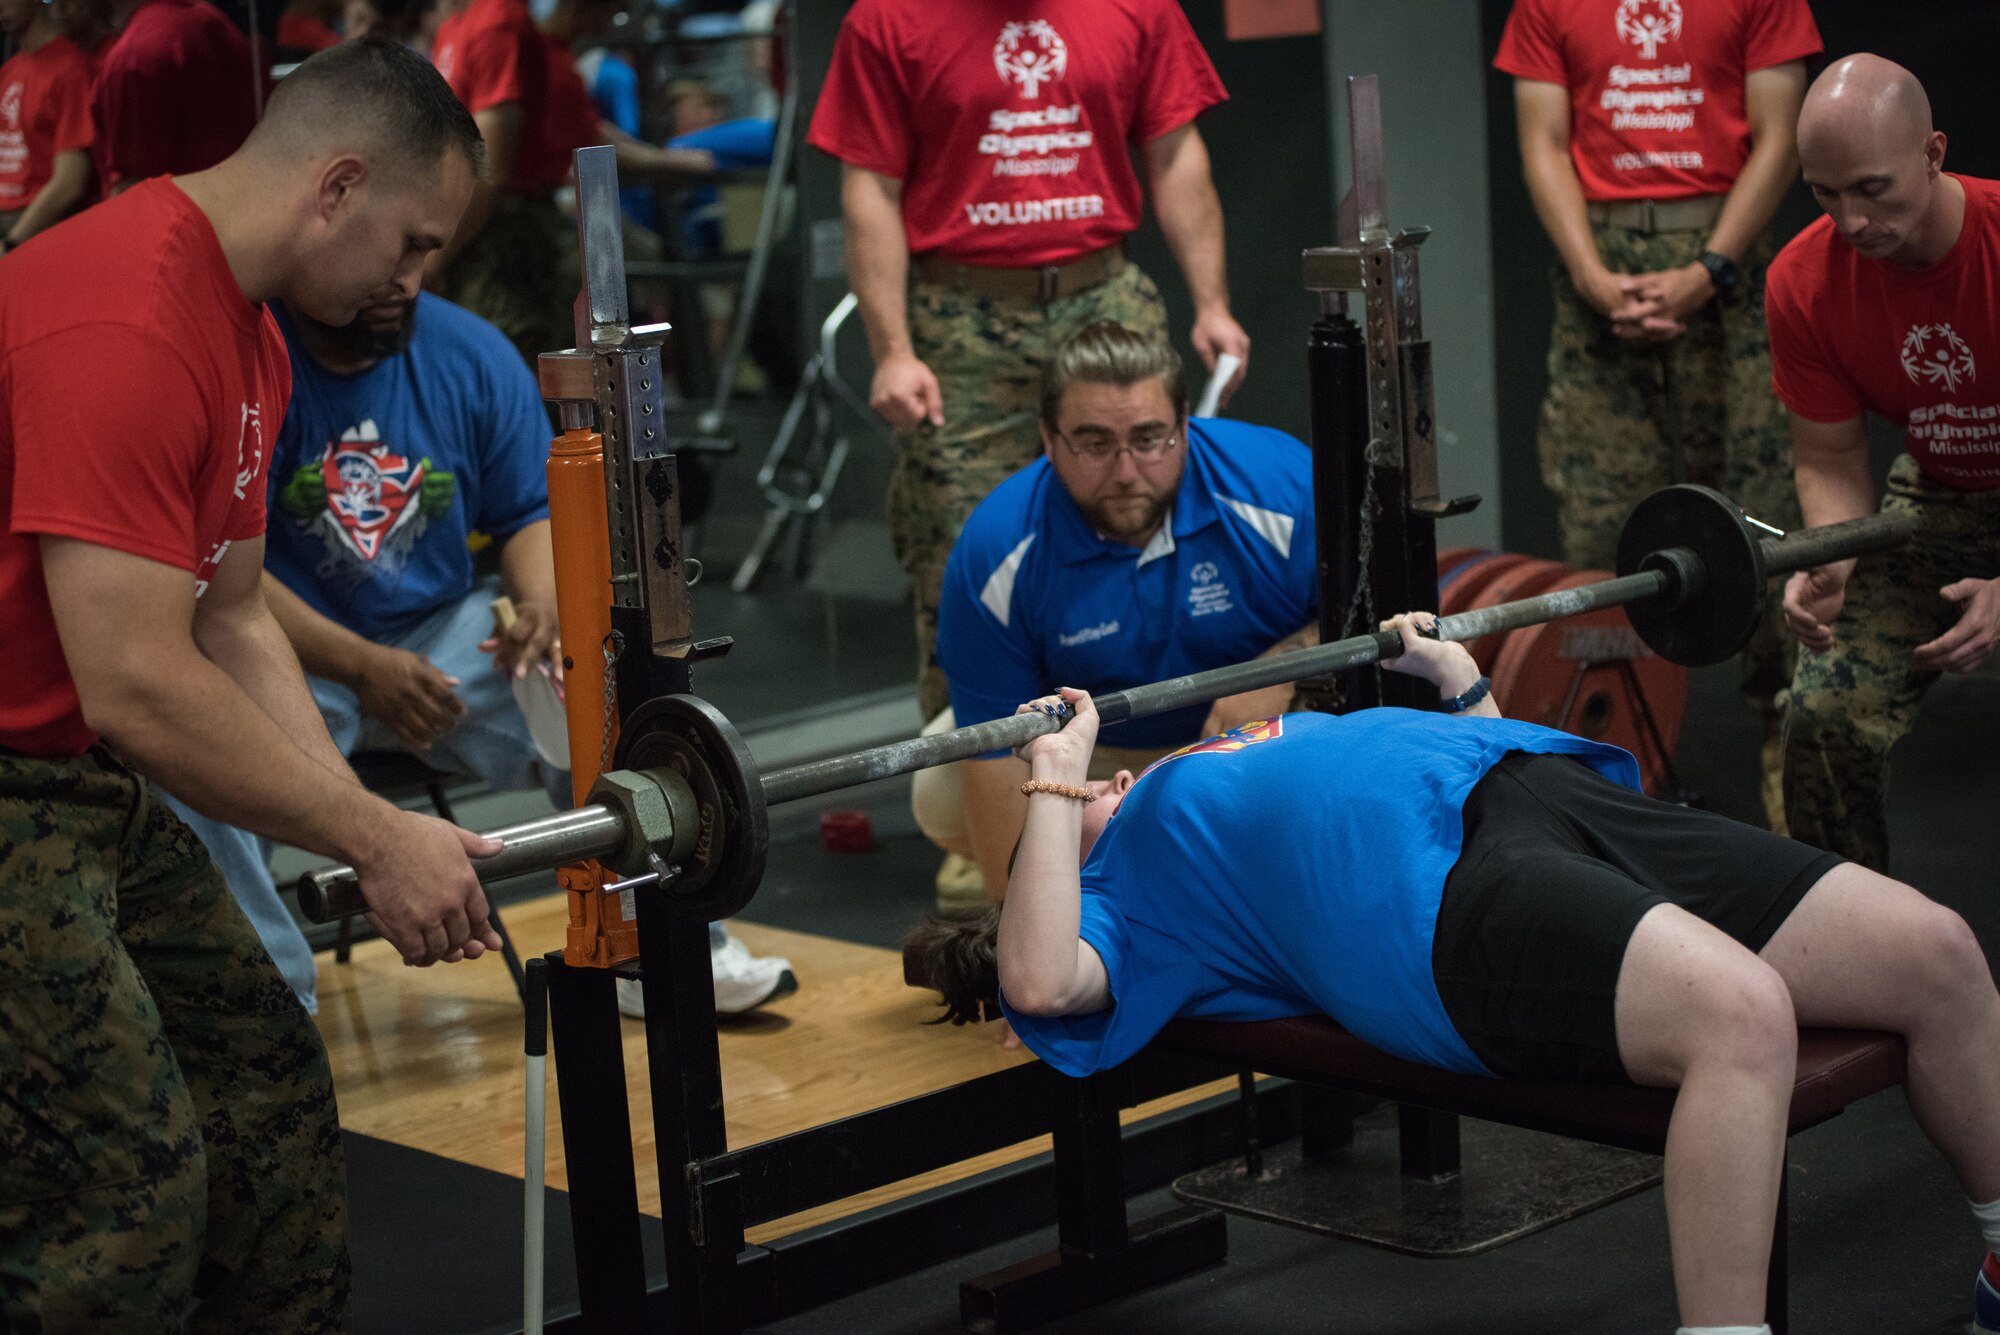 Lauren Smith, Area16 athlete,  competes in power lifting competition during the Special Olympics Mississippi 2018 Summer Games at the Triangle Fitness Center at Keesler Air Force Base, Mississippi, May 12, 2018. Founded in 1968, Special Olympics hosts sporting events around the world for people of all ages with special needs to include more than 700 athletes from Mississippi. (U.S. Air Force photo by Andre' Askew)